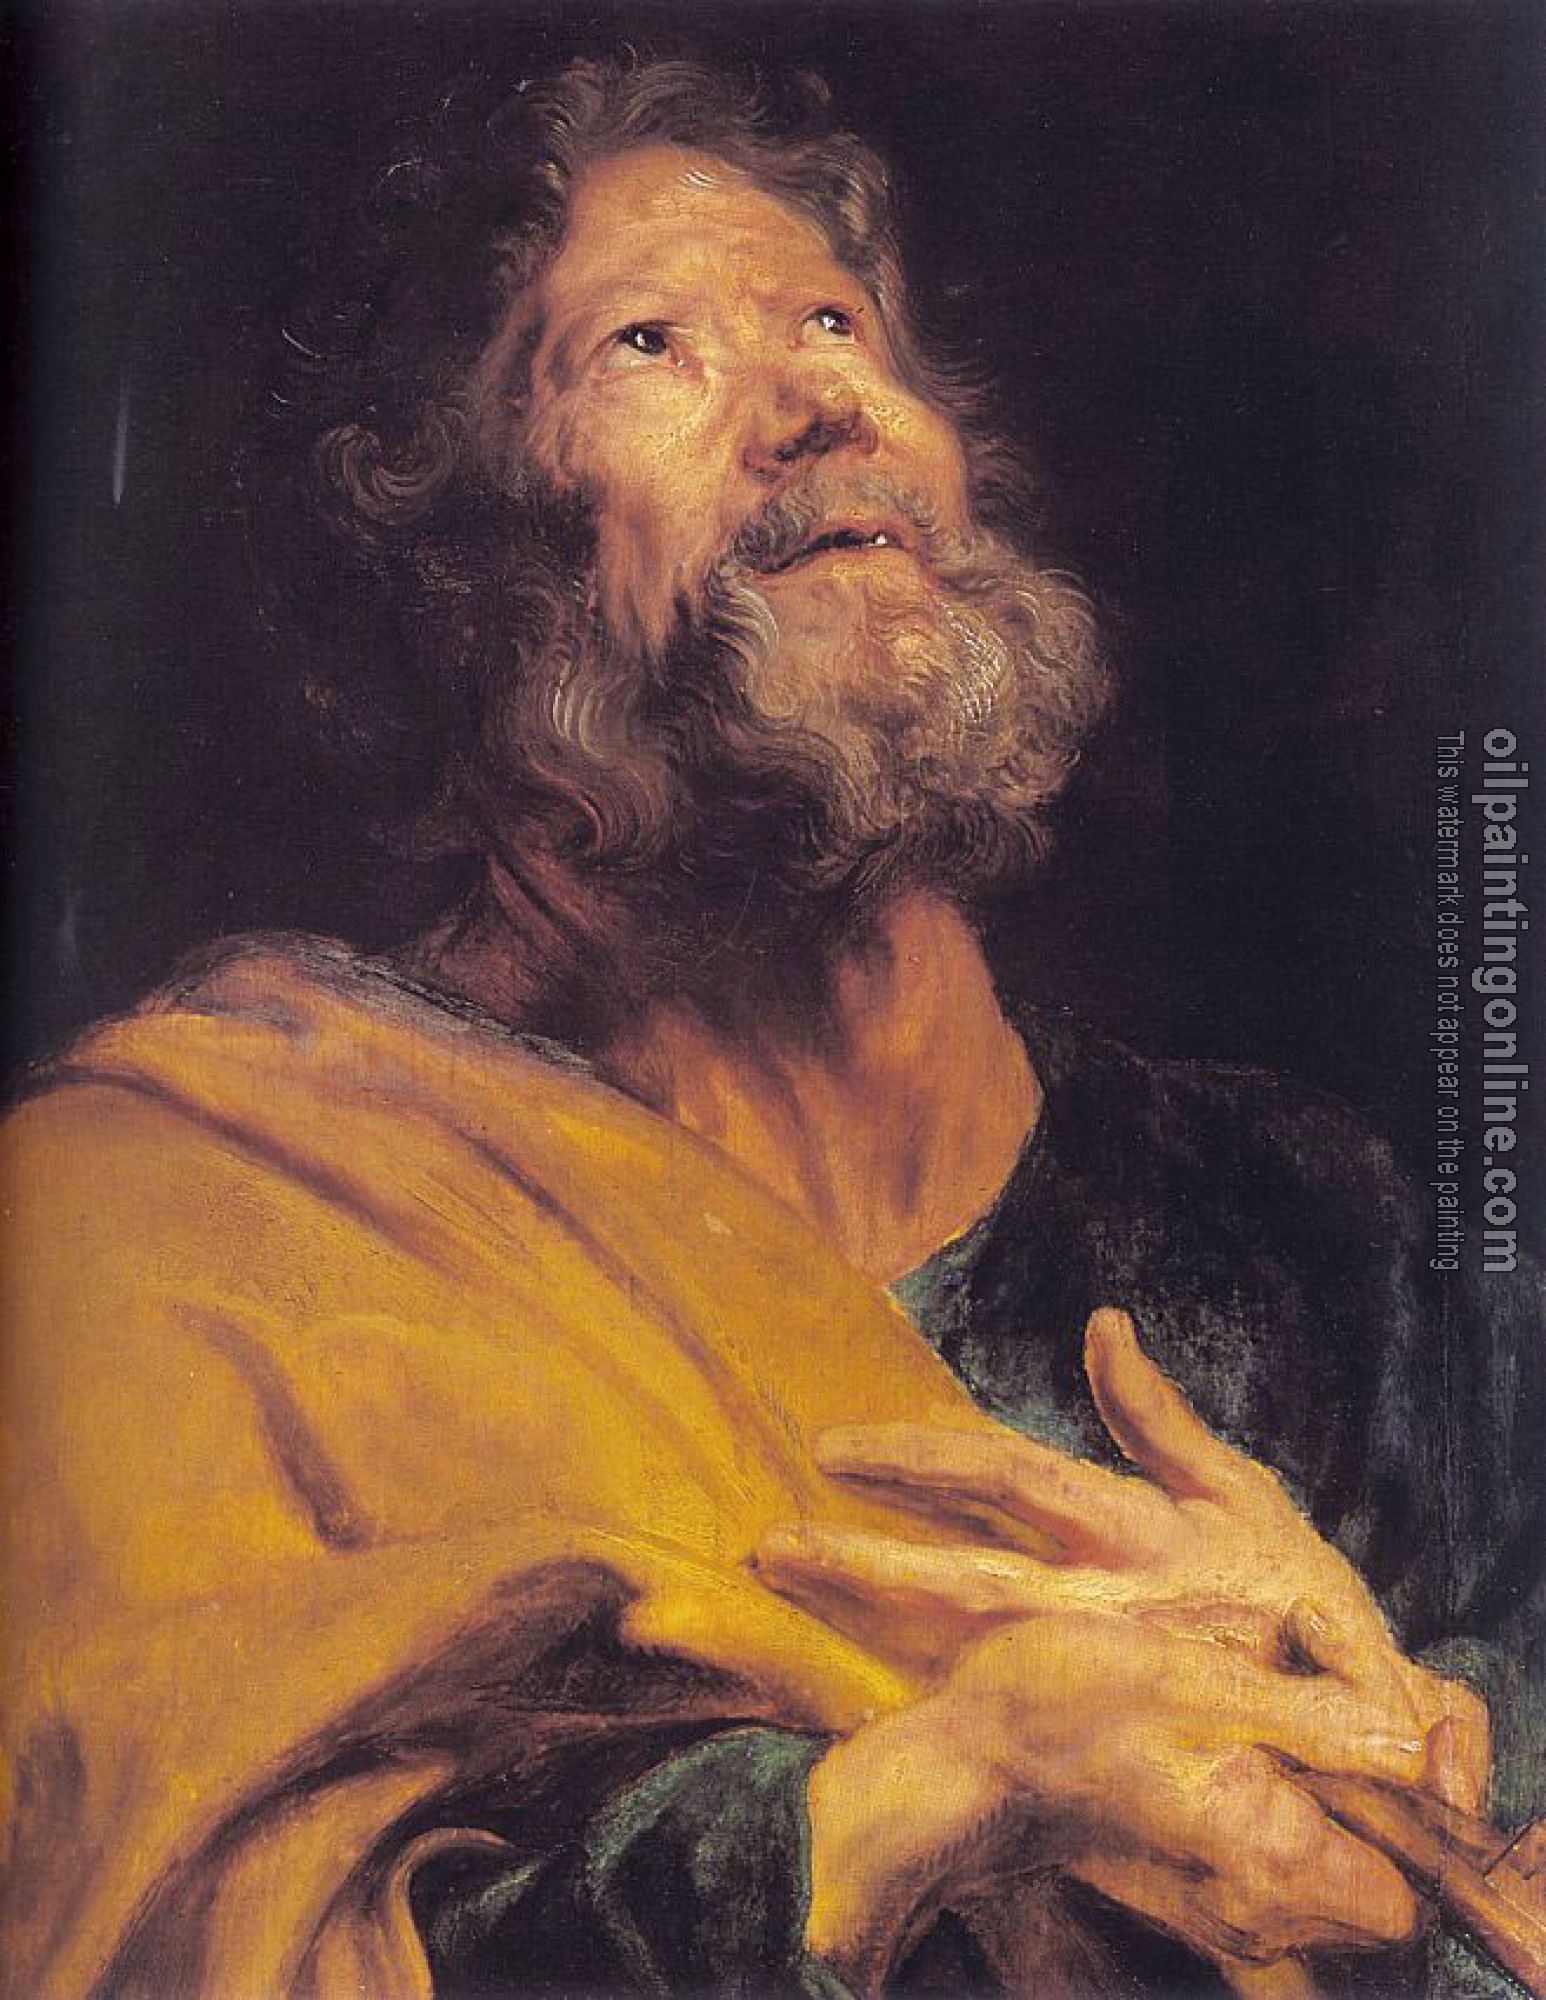 Dyck, Anthony van - The Penitent Apostle Peter